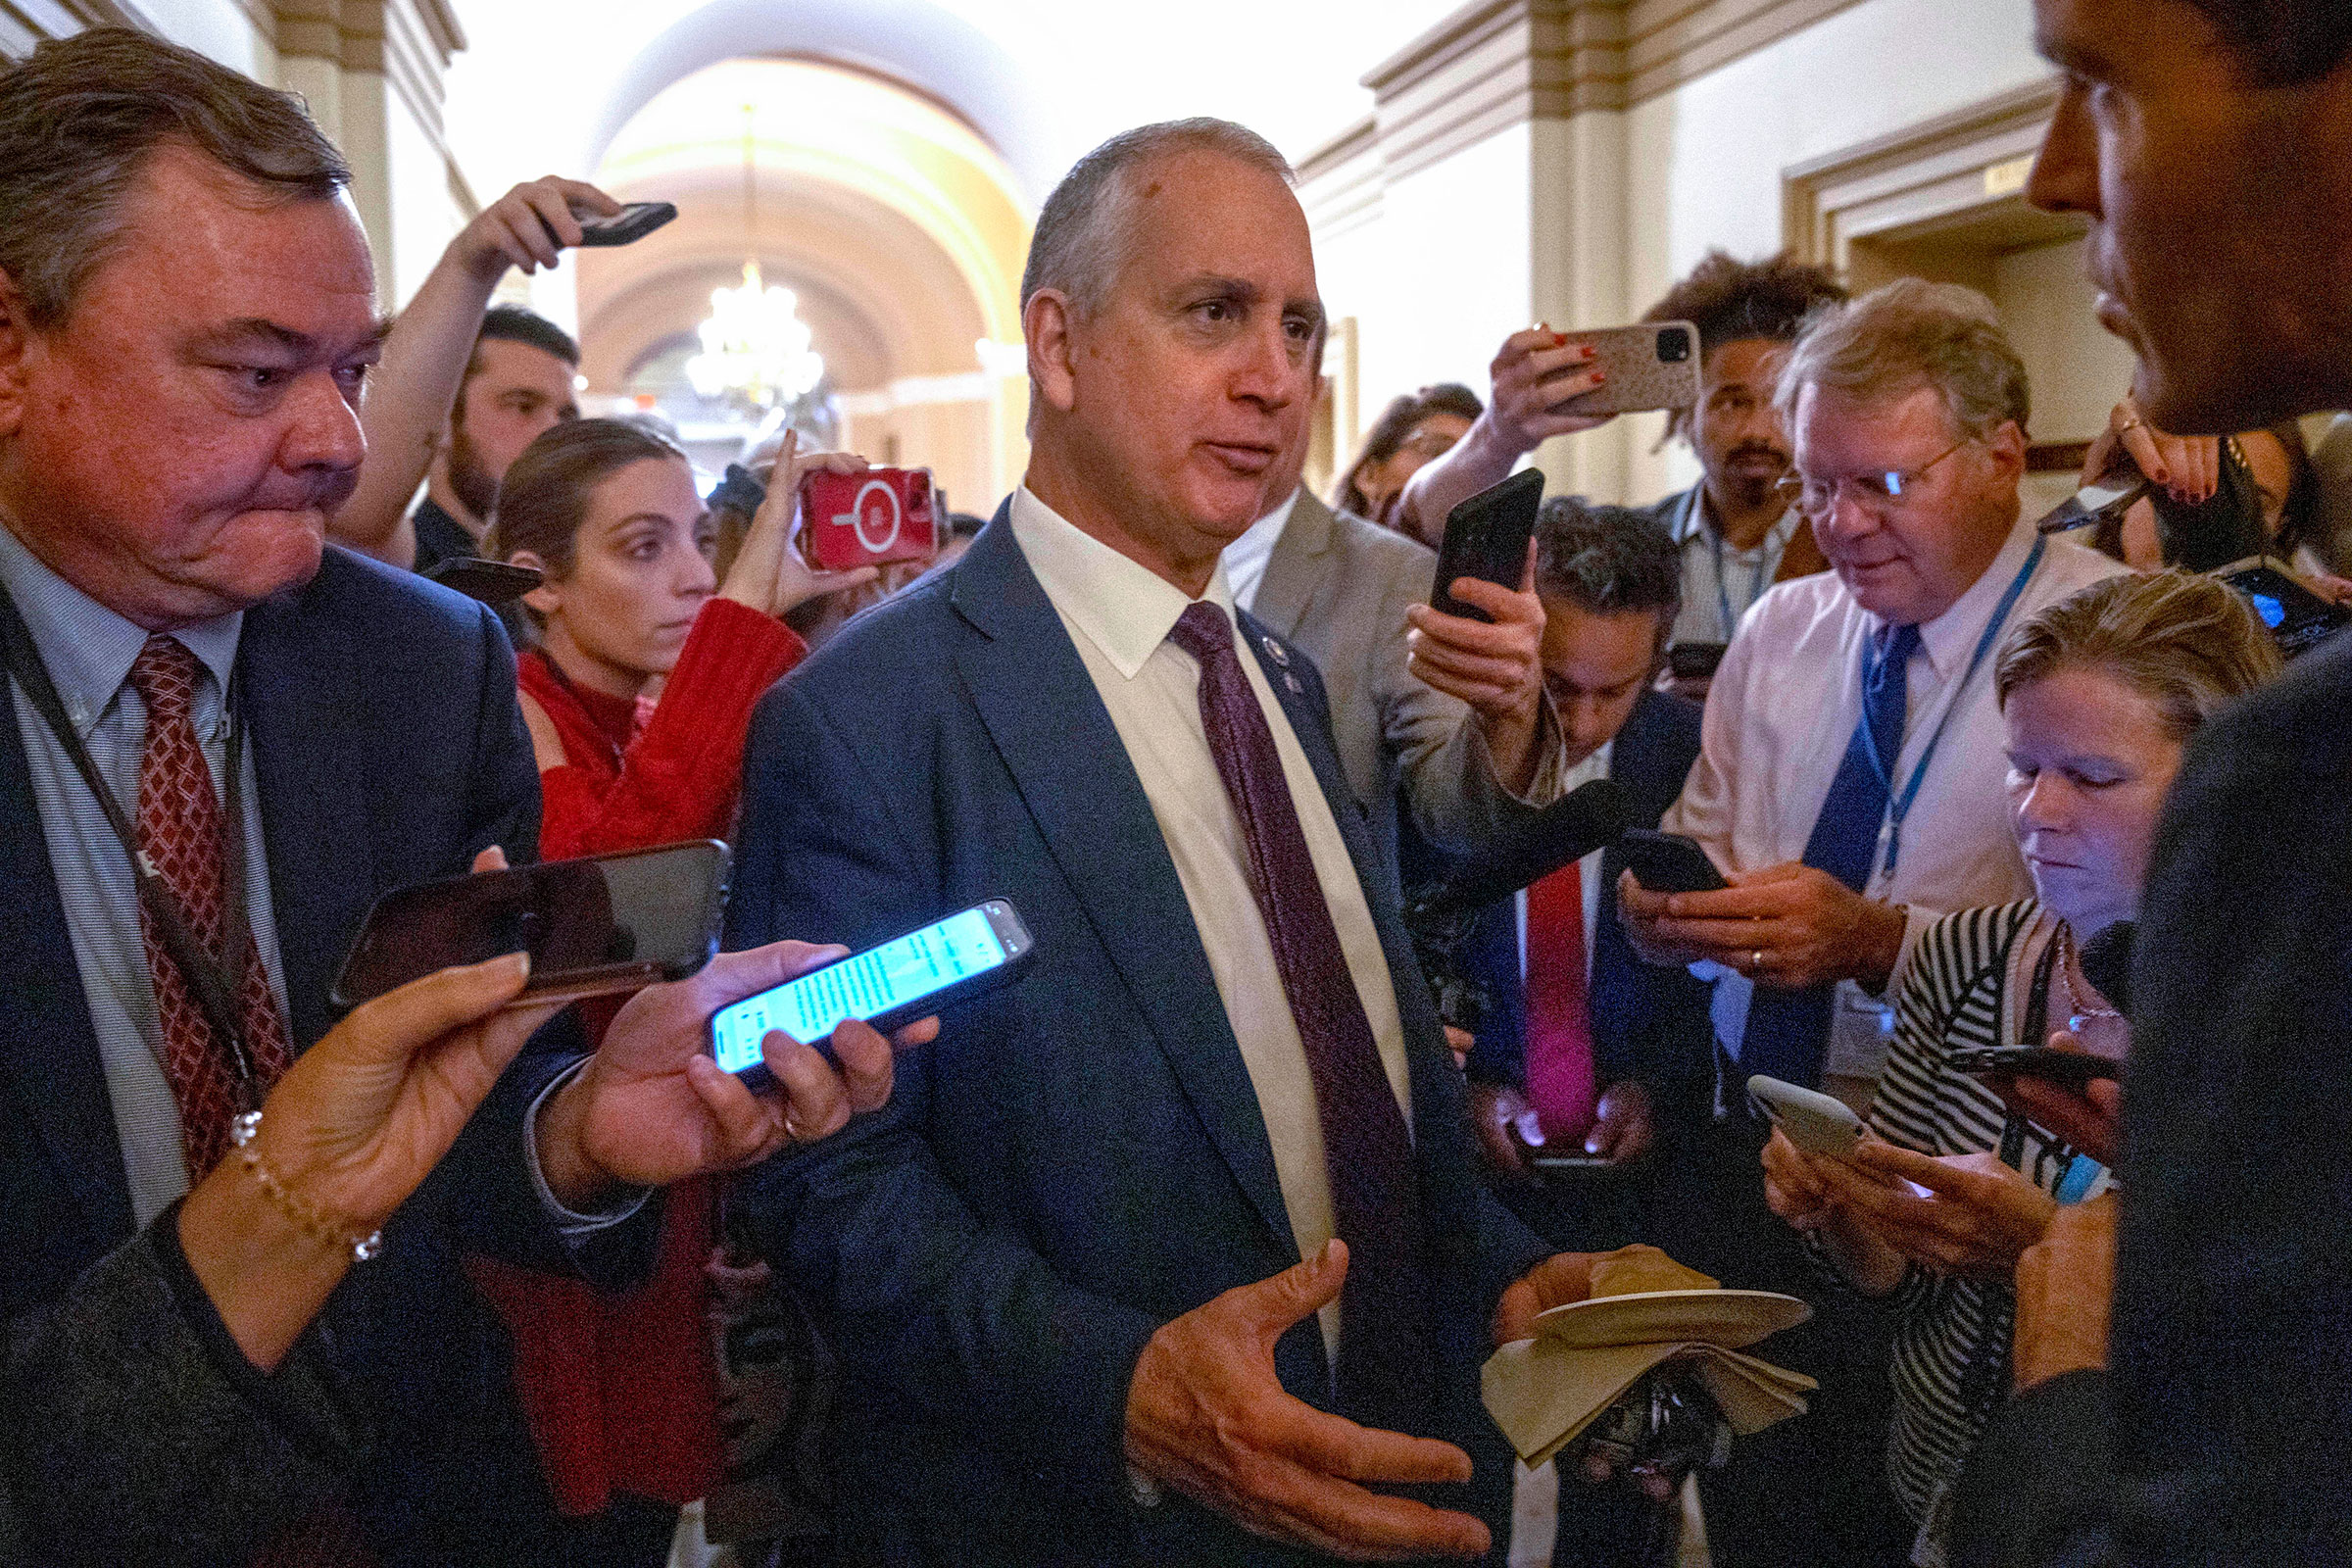 Rep. Mario Diaz-Balart speaks to reporters at the Capitol in Washington, DC, on Wednesday.